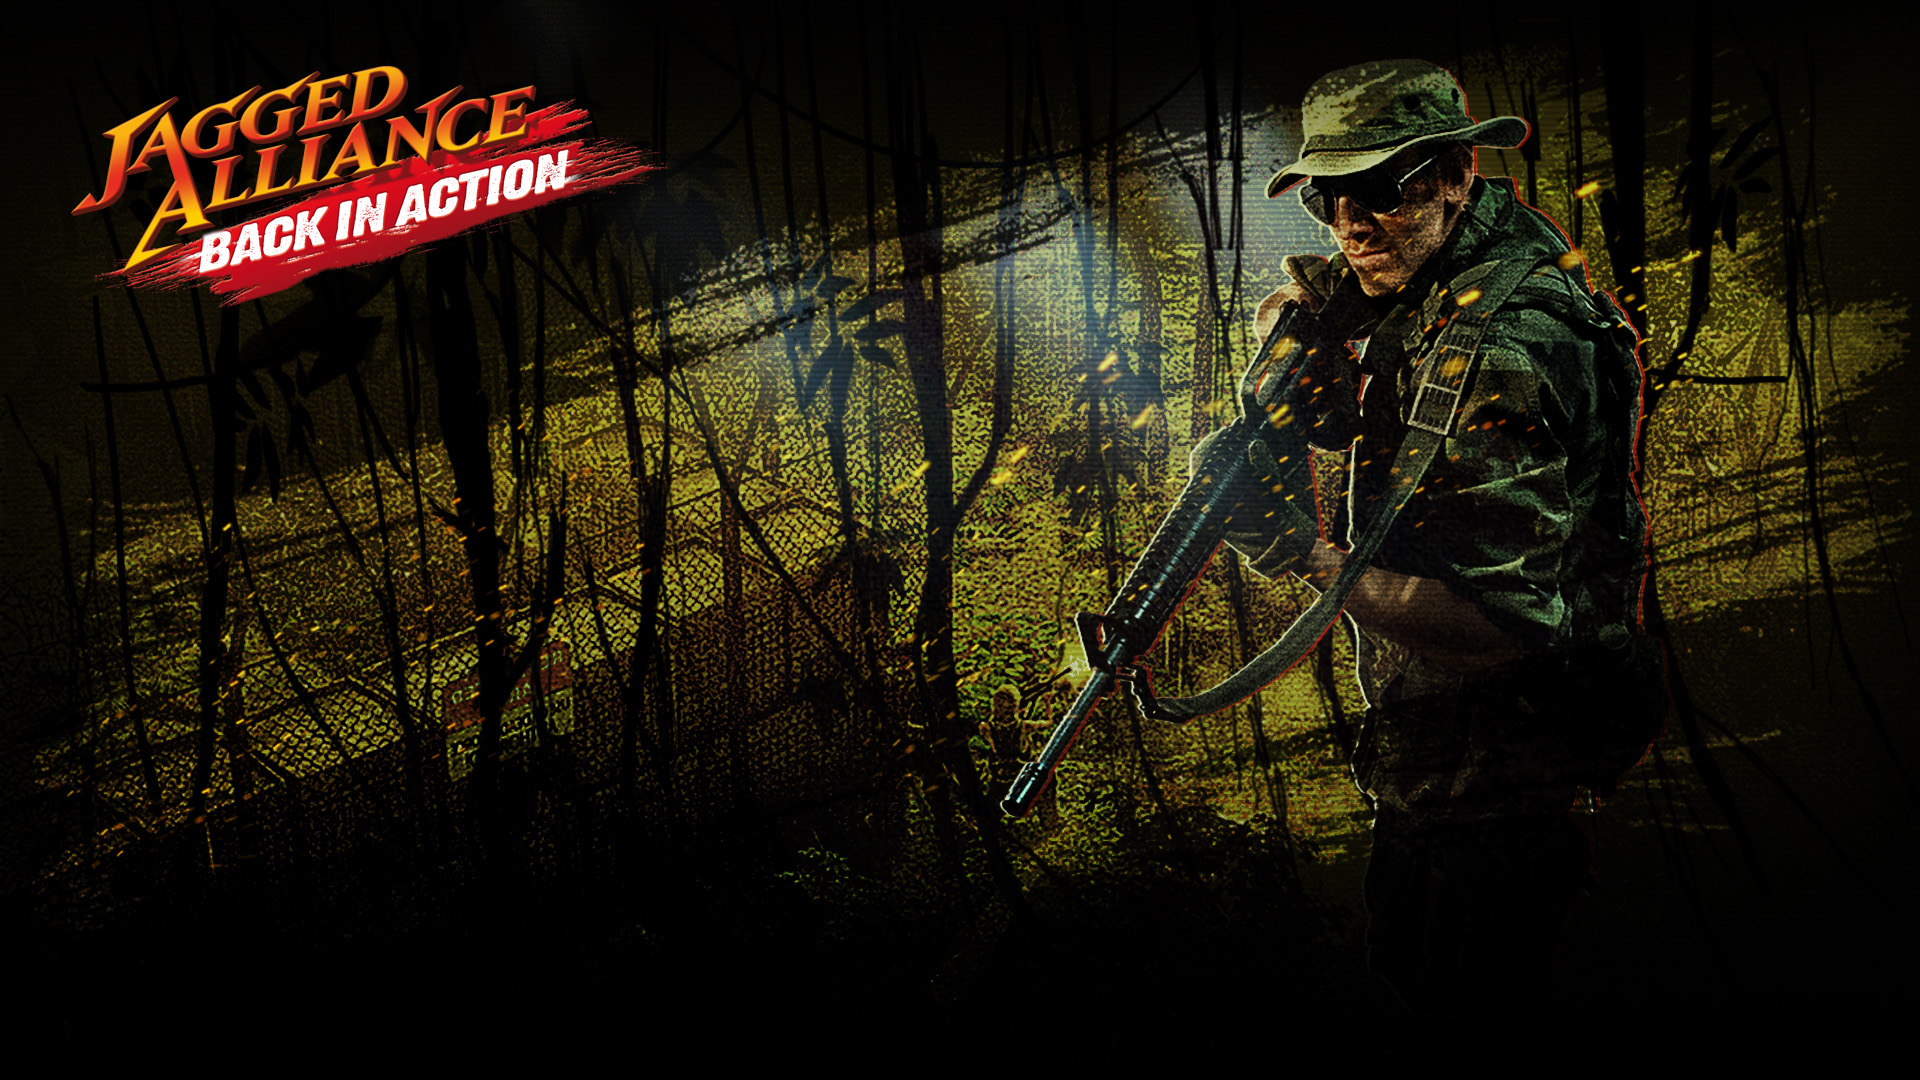 Jagged Alliance Back in Action Wallpaper 03